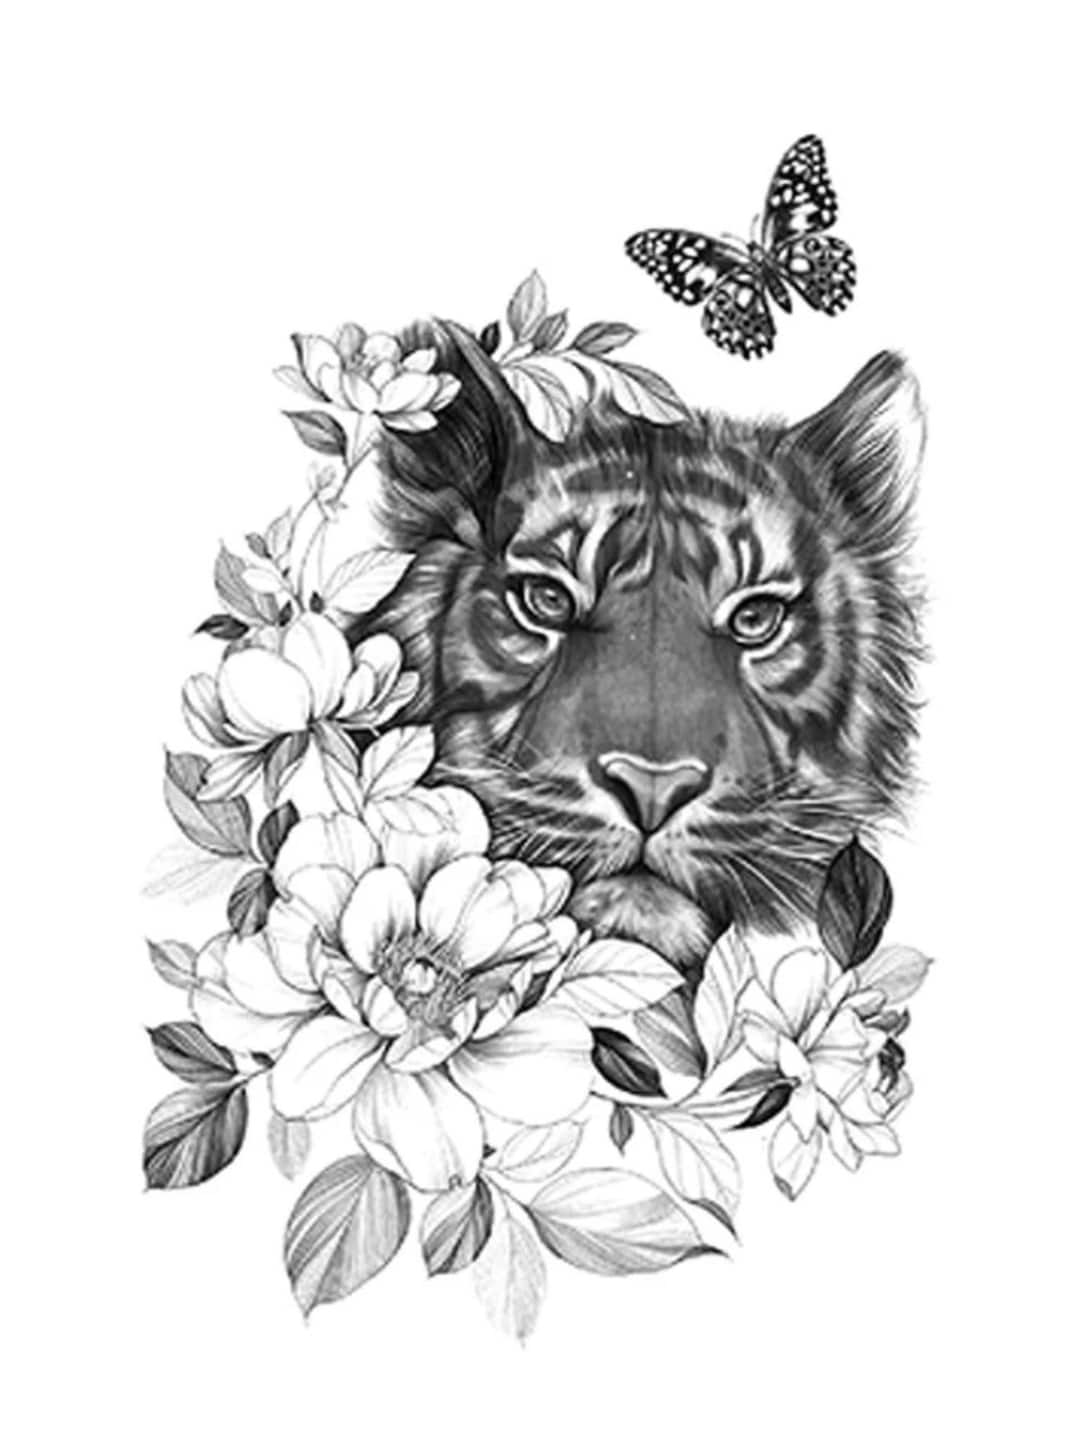 Tiger Walking and Roar Design by Hand Drawing for Tribal Tattoo Stock  Illustration  Illustration of hand aggressive 114838938